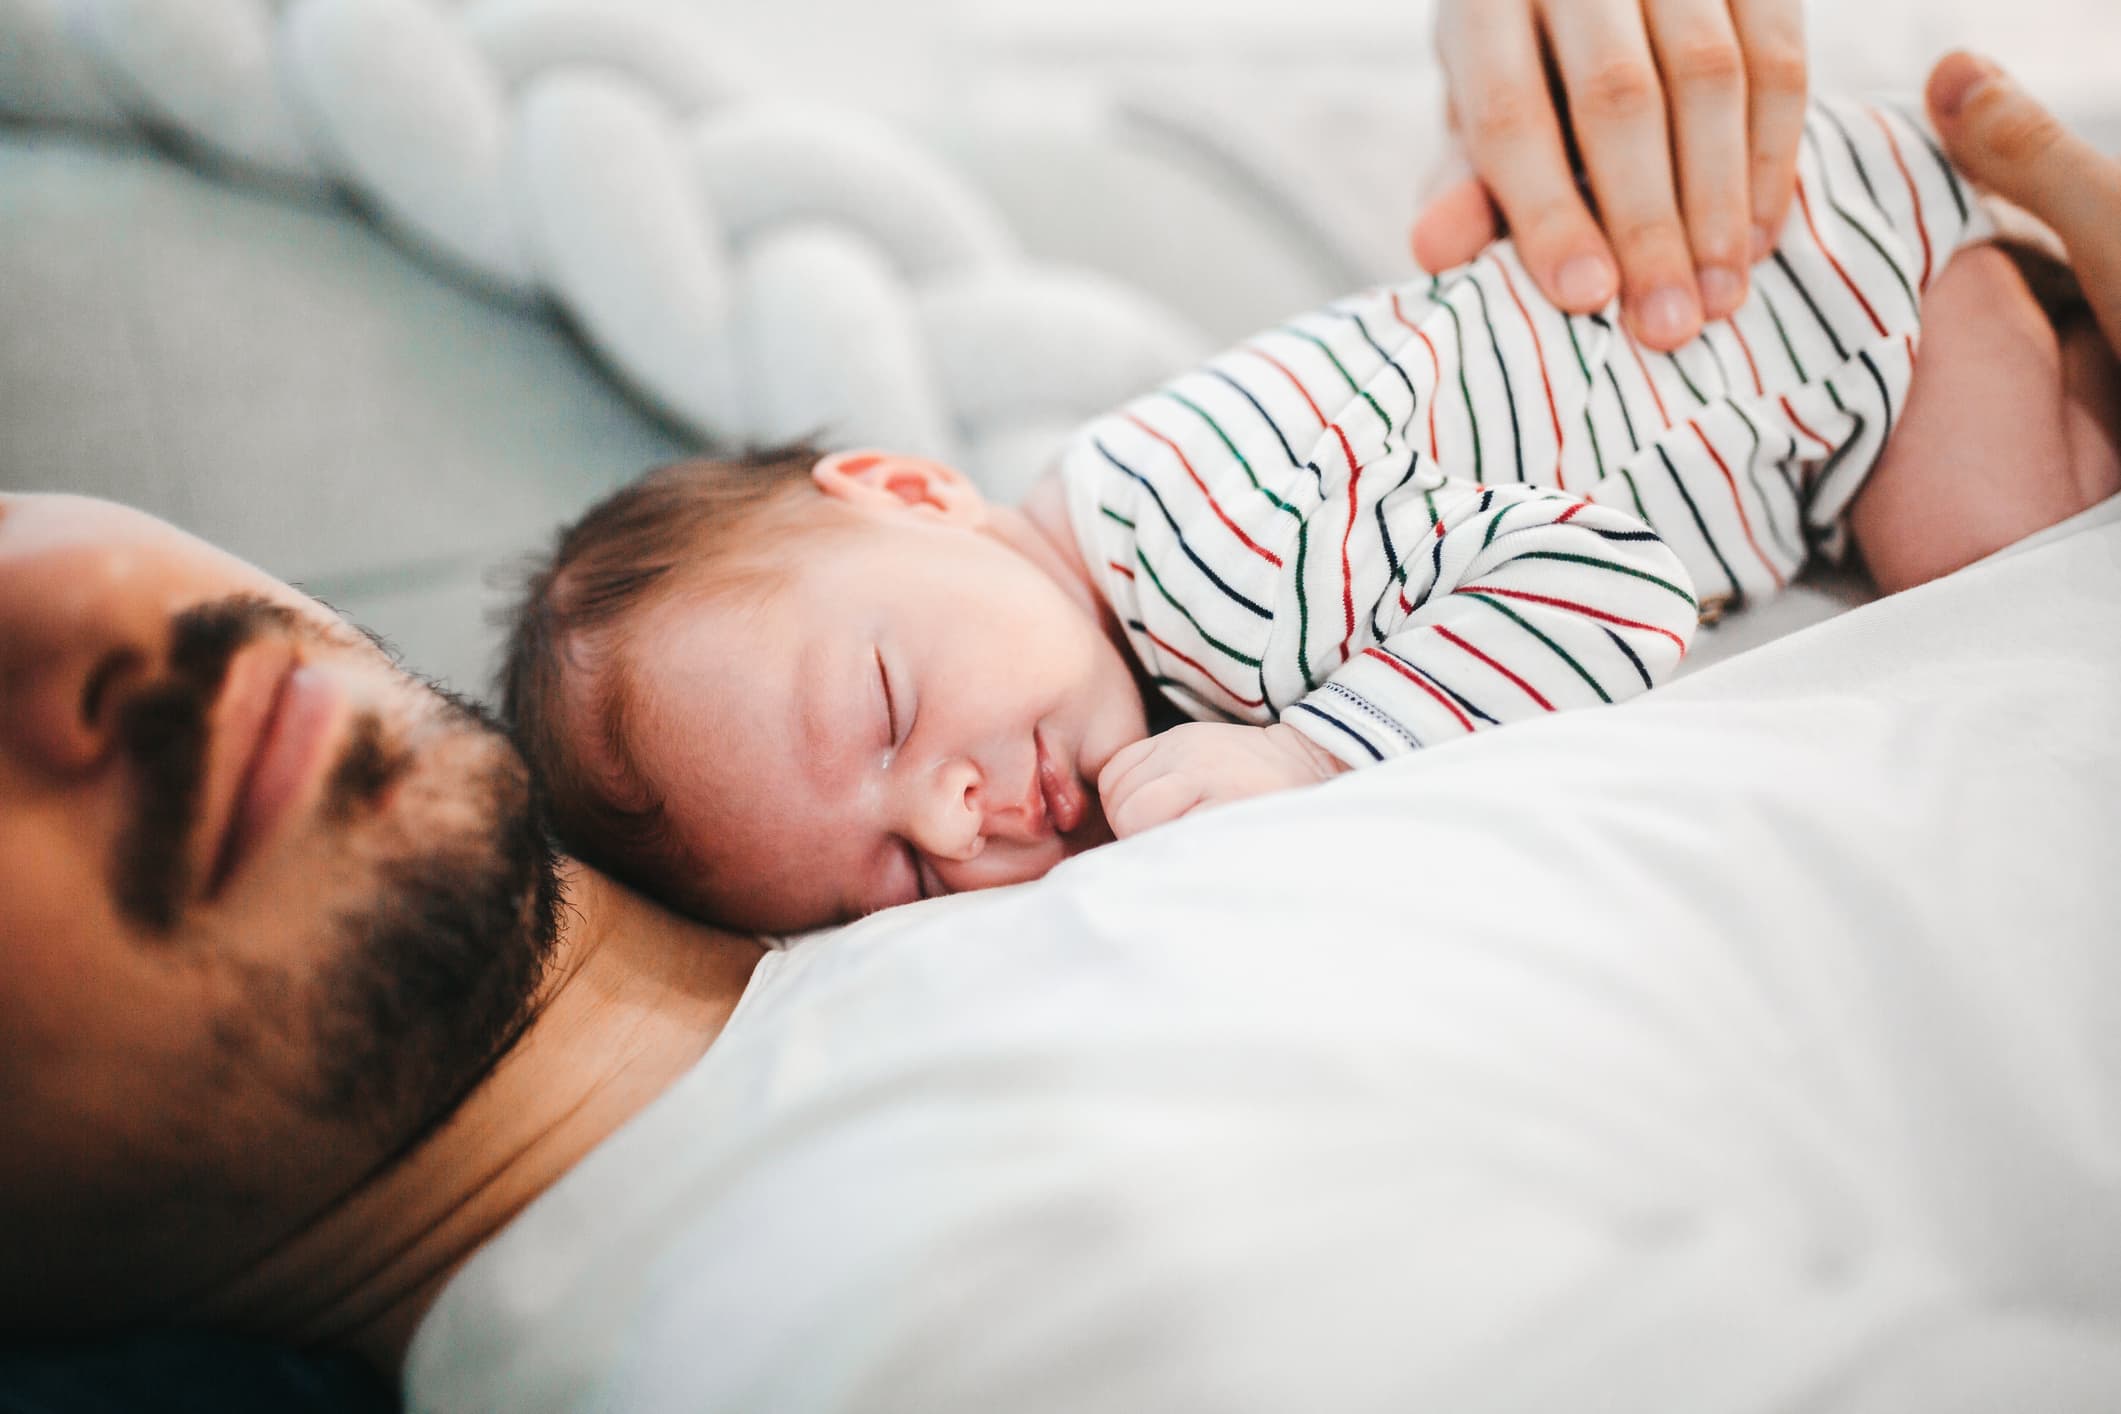 7 Ways to Make Your Partner Feel Special and Helpful After Having a Baby